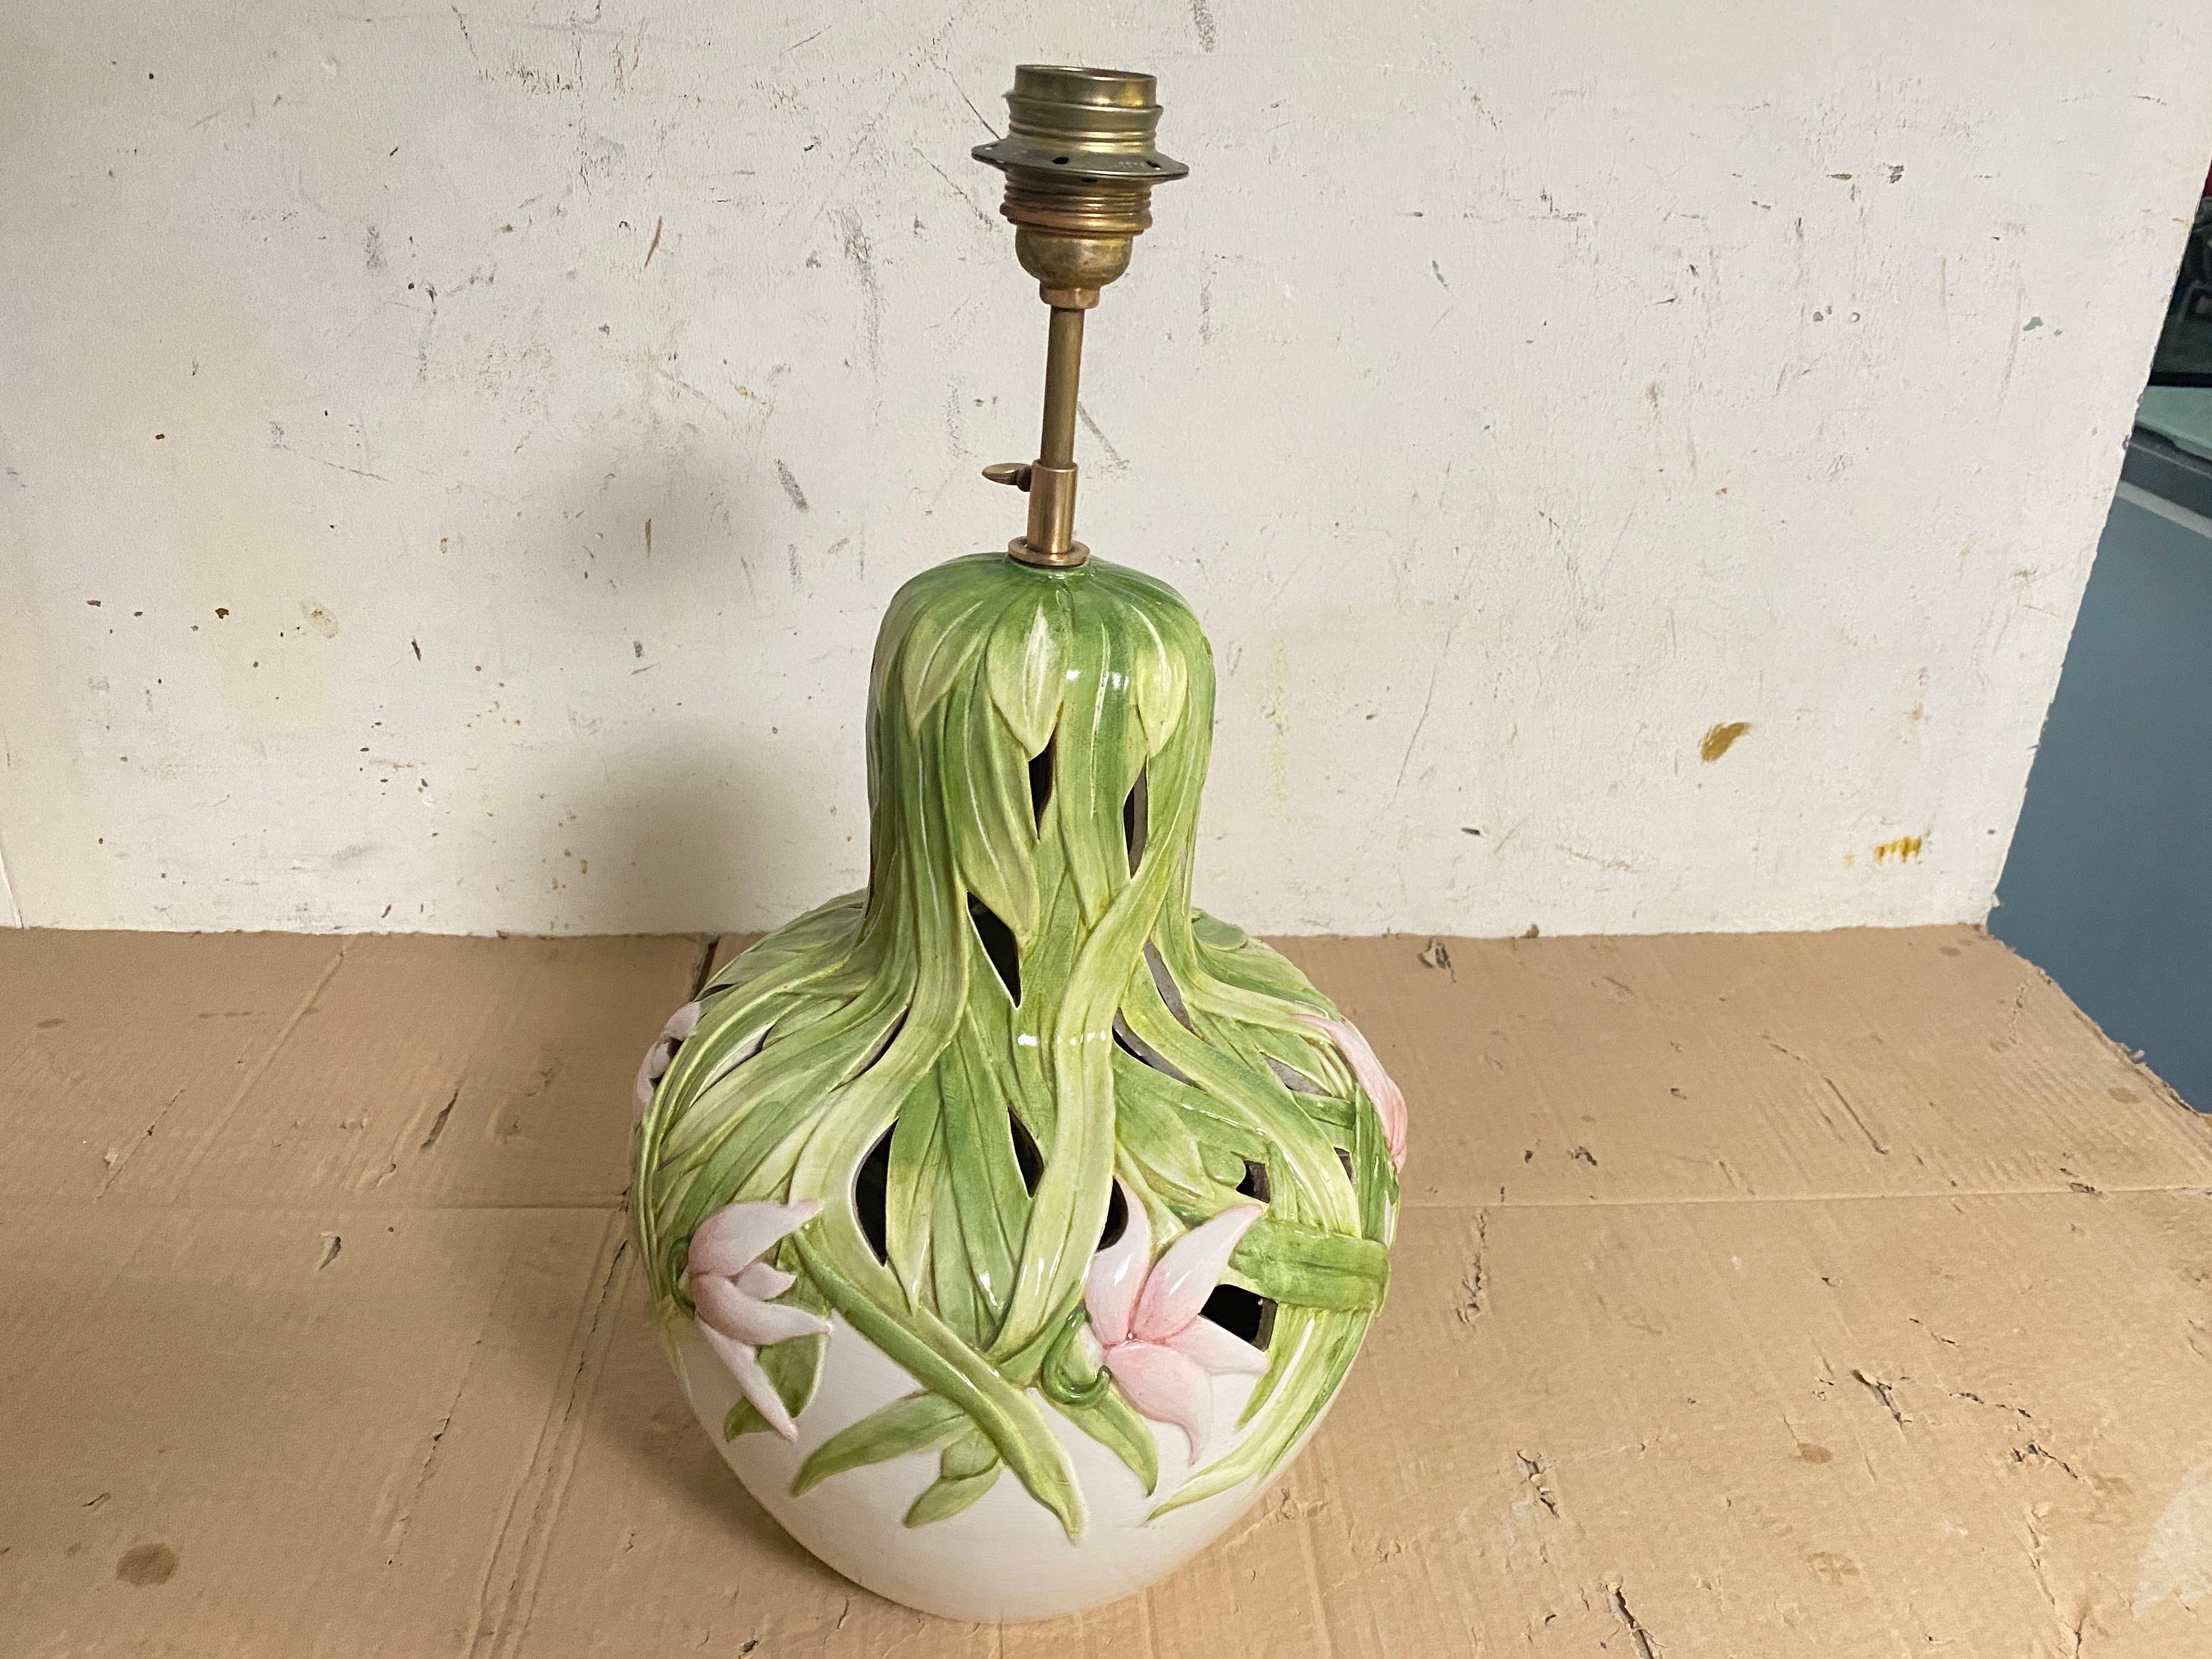 Table Lamp in Crakled Enemeled Ceramic Green Pink and White colors, France, 1970 For Sale 12